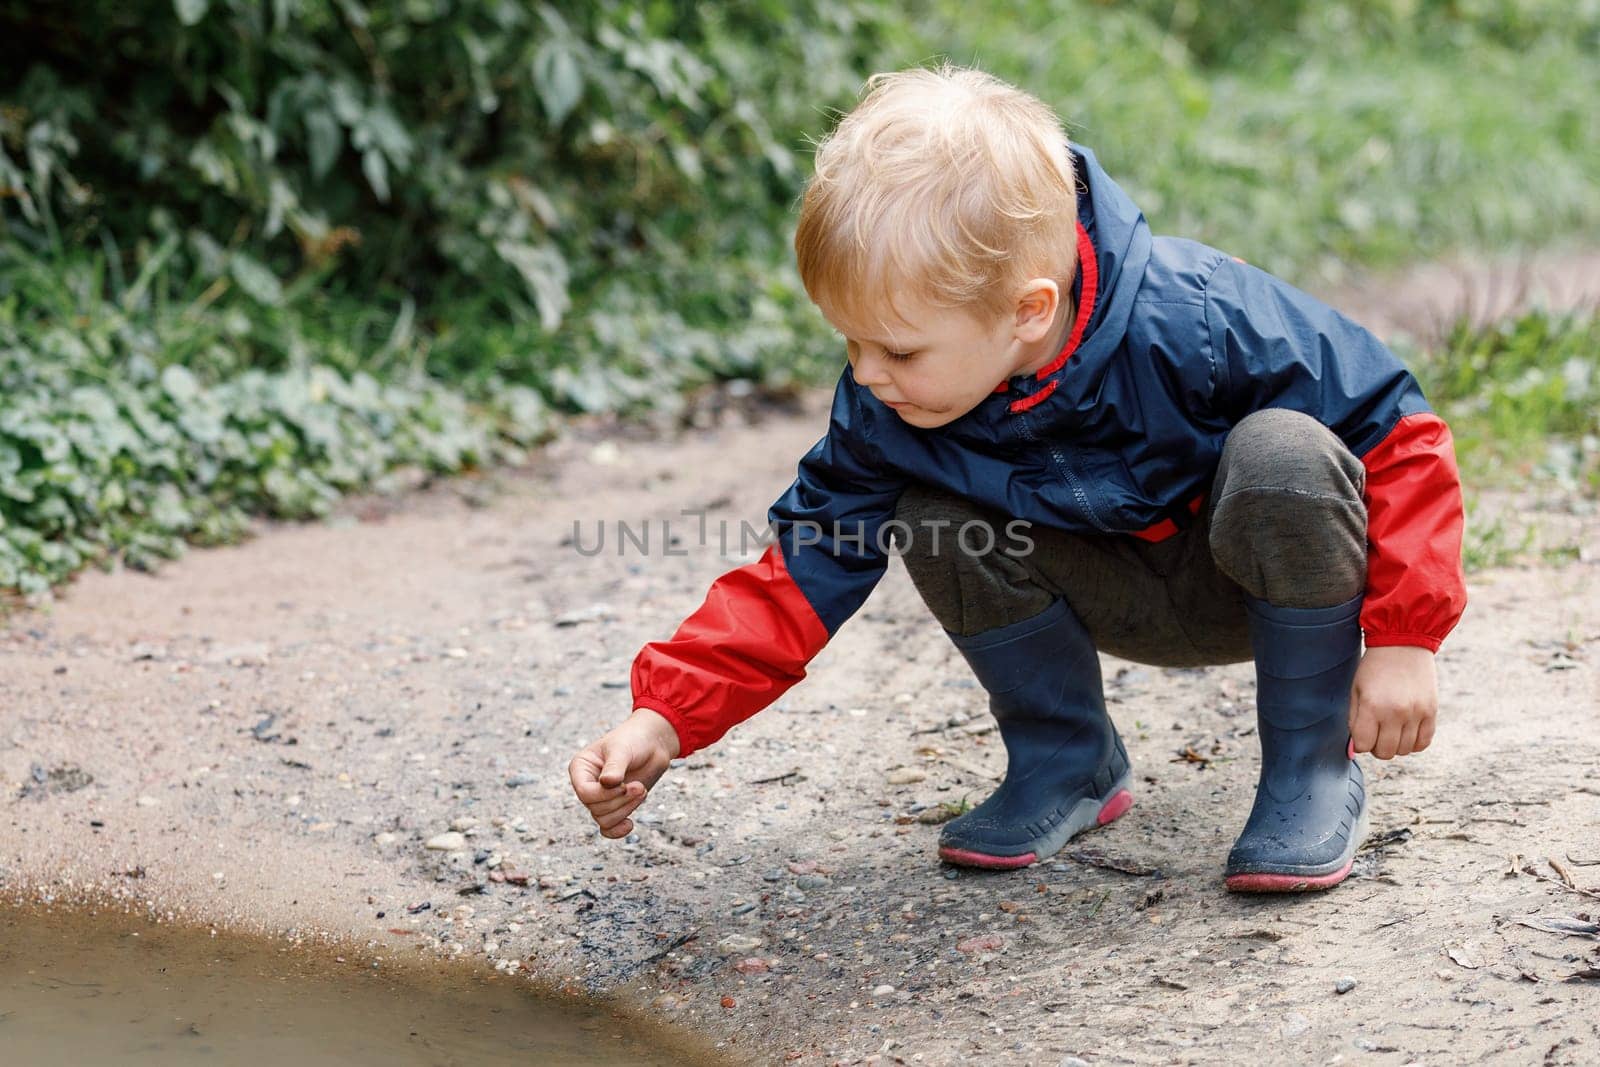 A child squat in a nature explores a dirty swamp, the little one smears his hands and face.